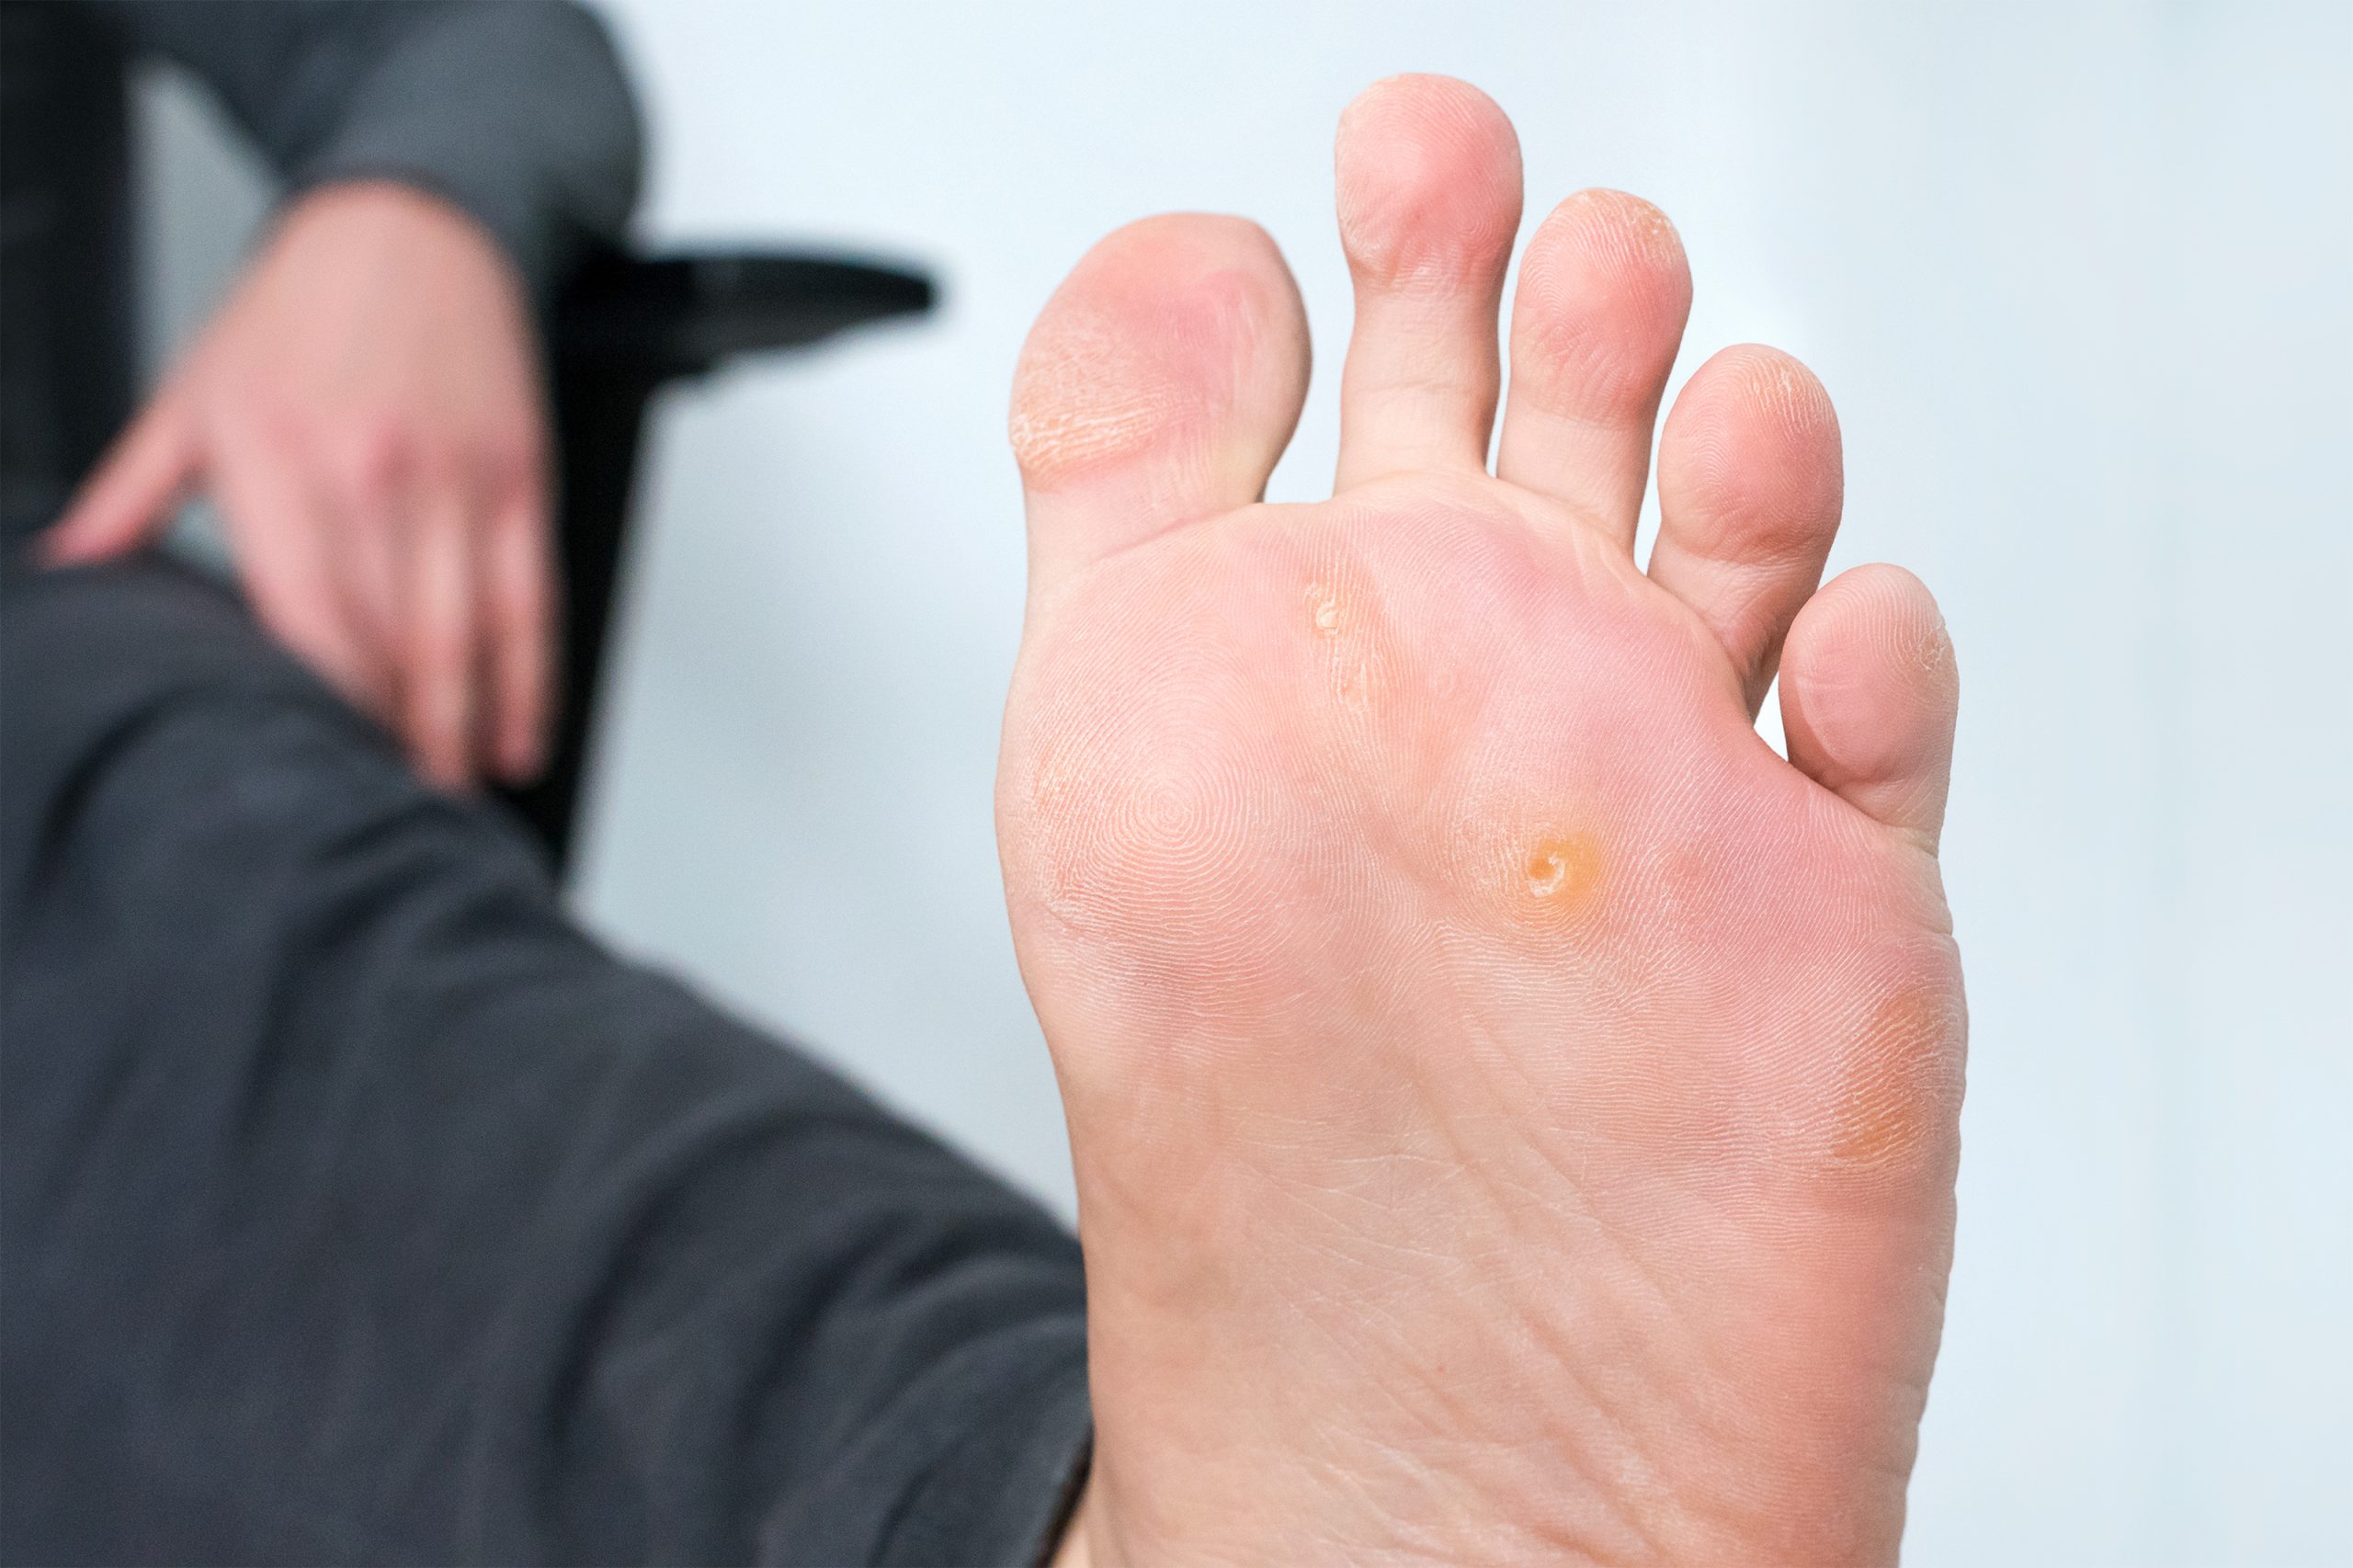 How to remove and avoid foot corns